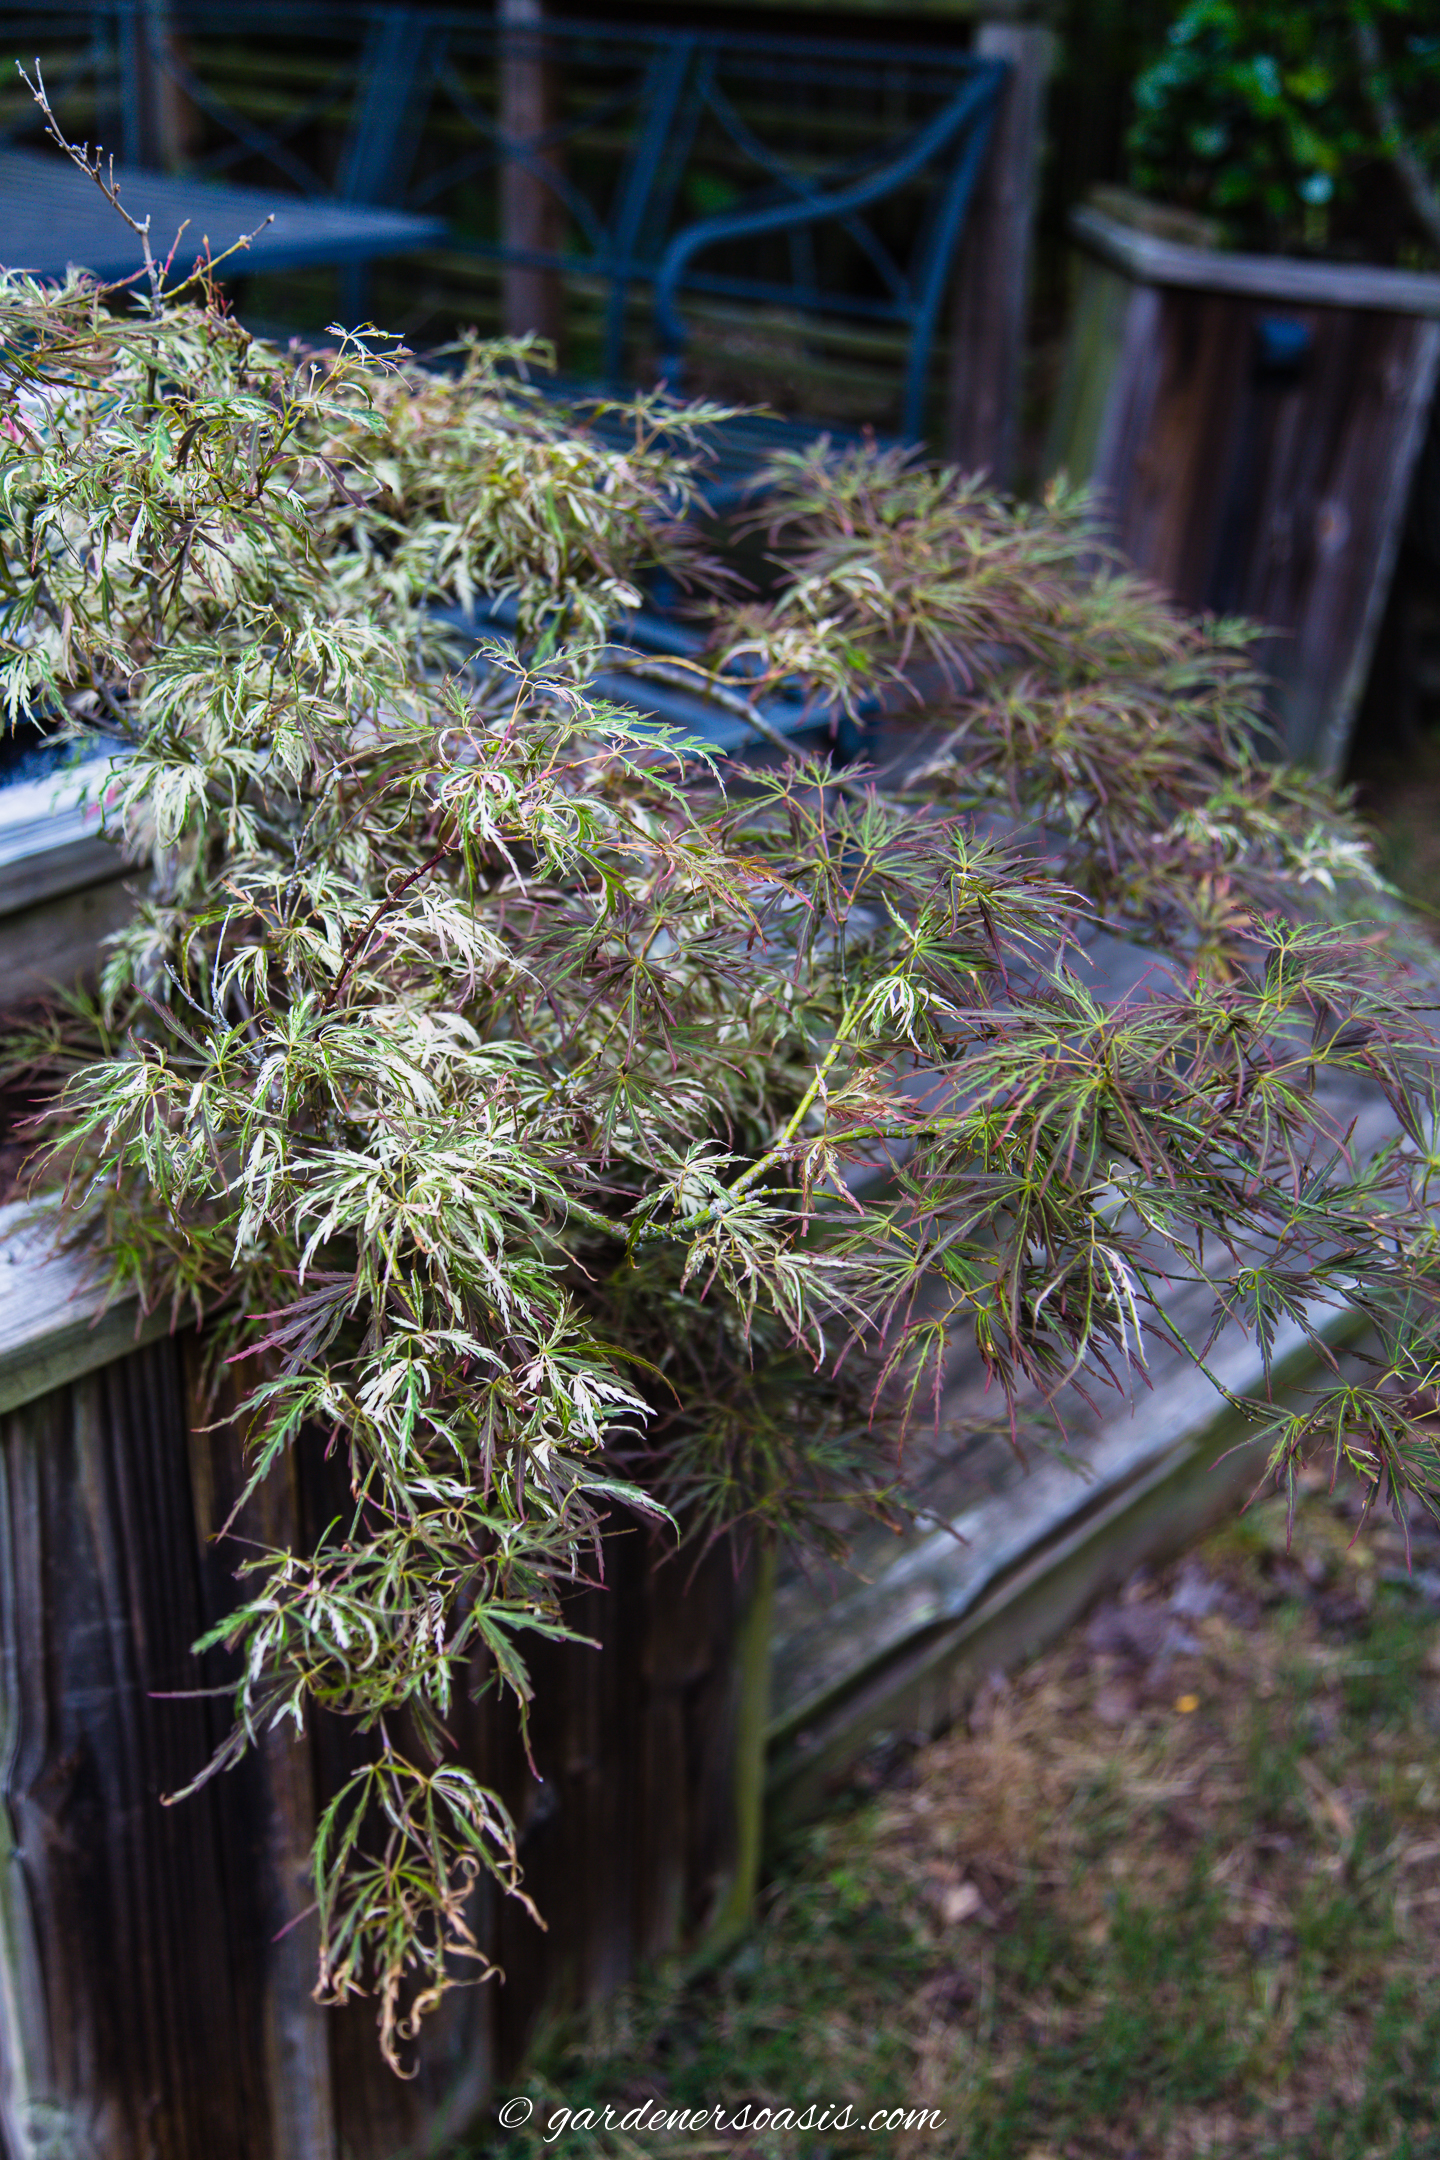 Acer Palmatum 'Toyama Nishiki' growing in a container